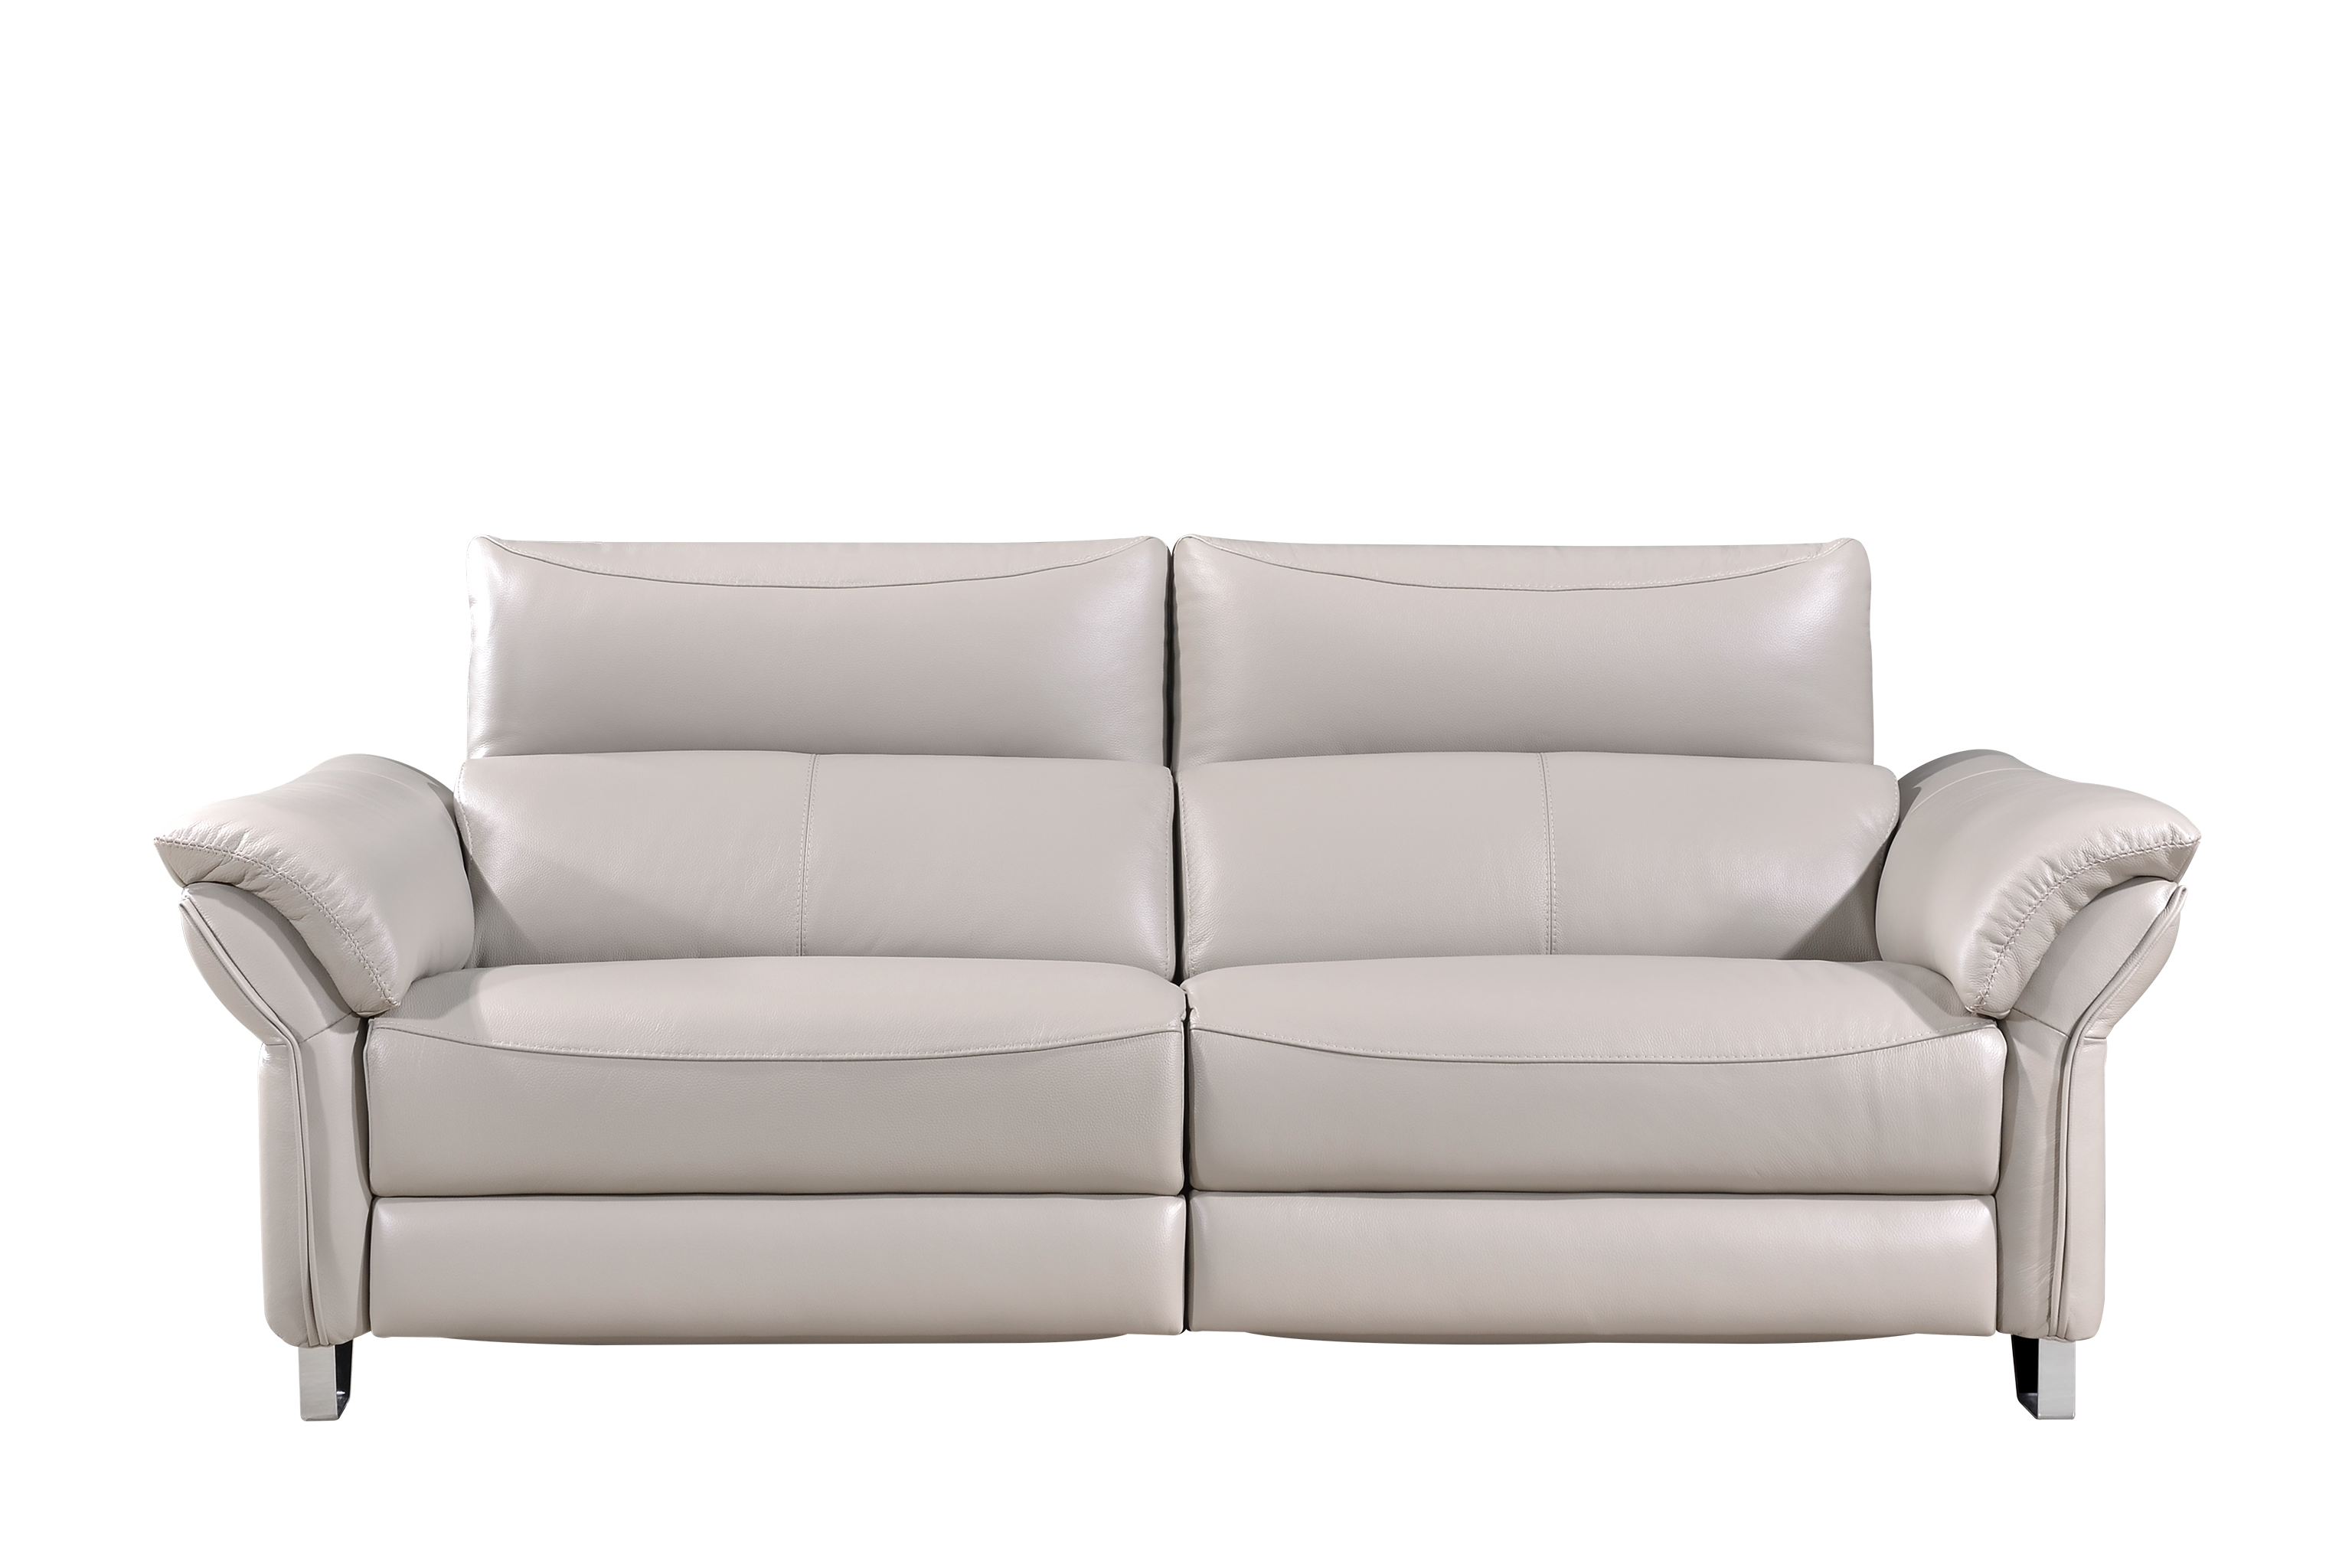 TOMAS 2.5 Seater Recliner Sofa in Leather by Castilla